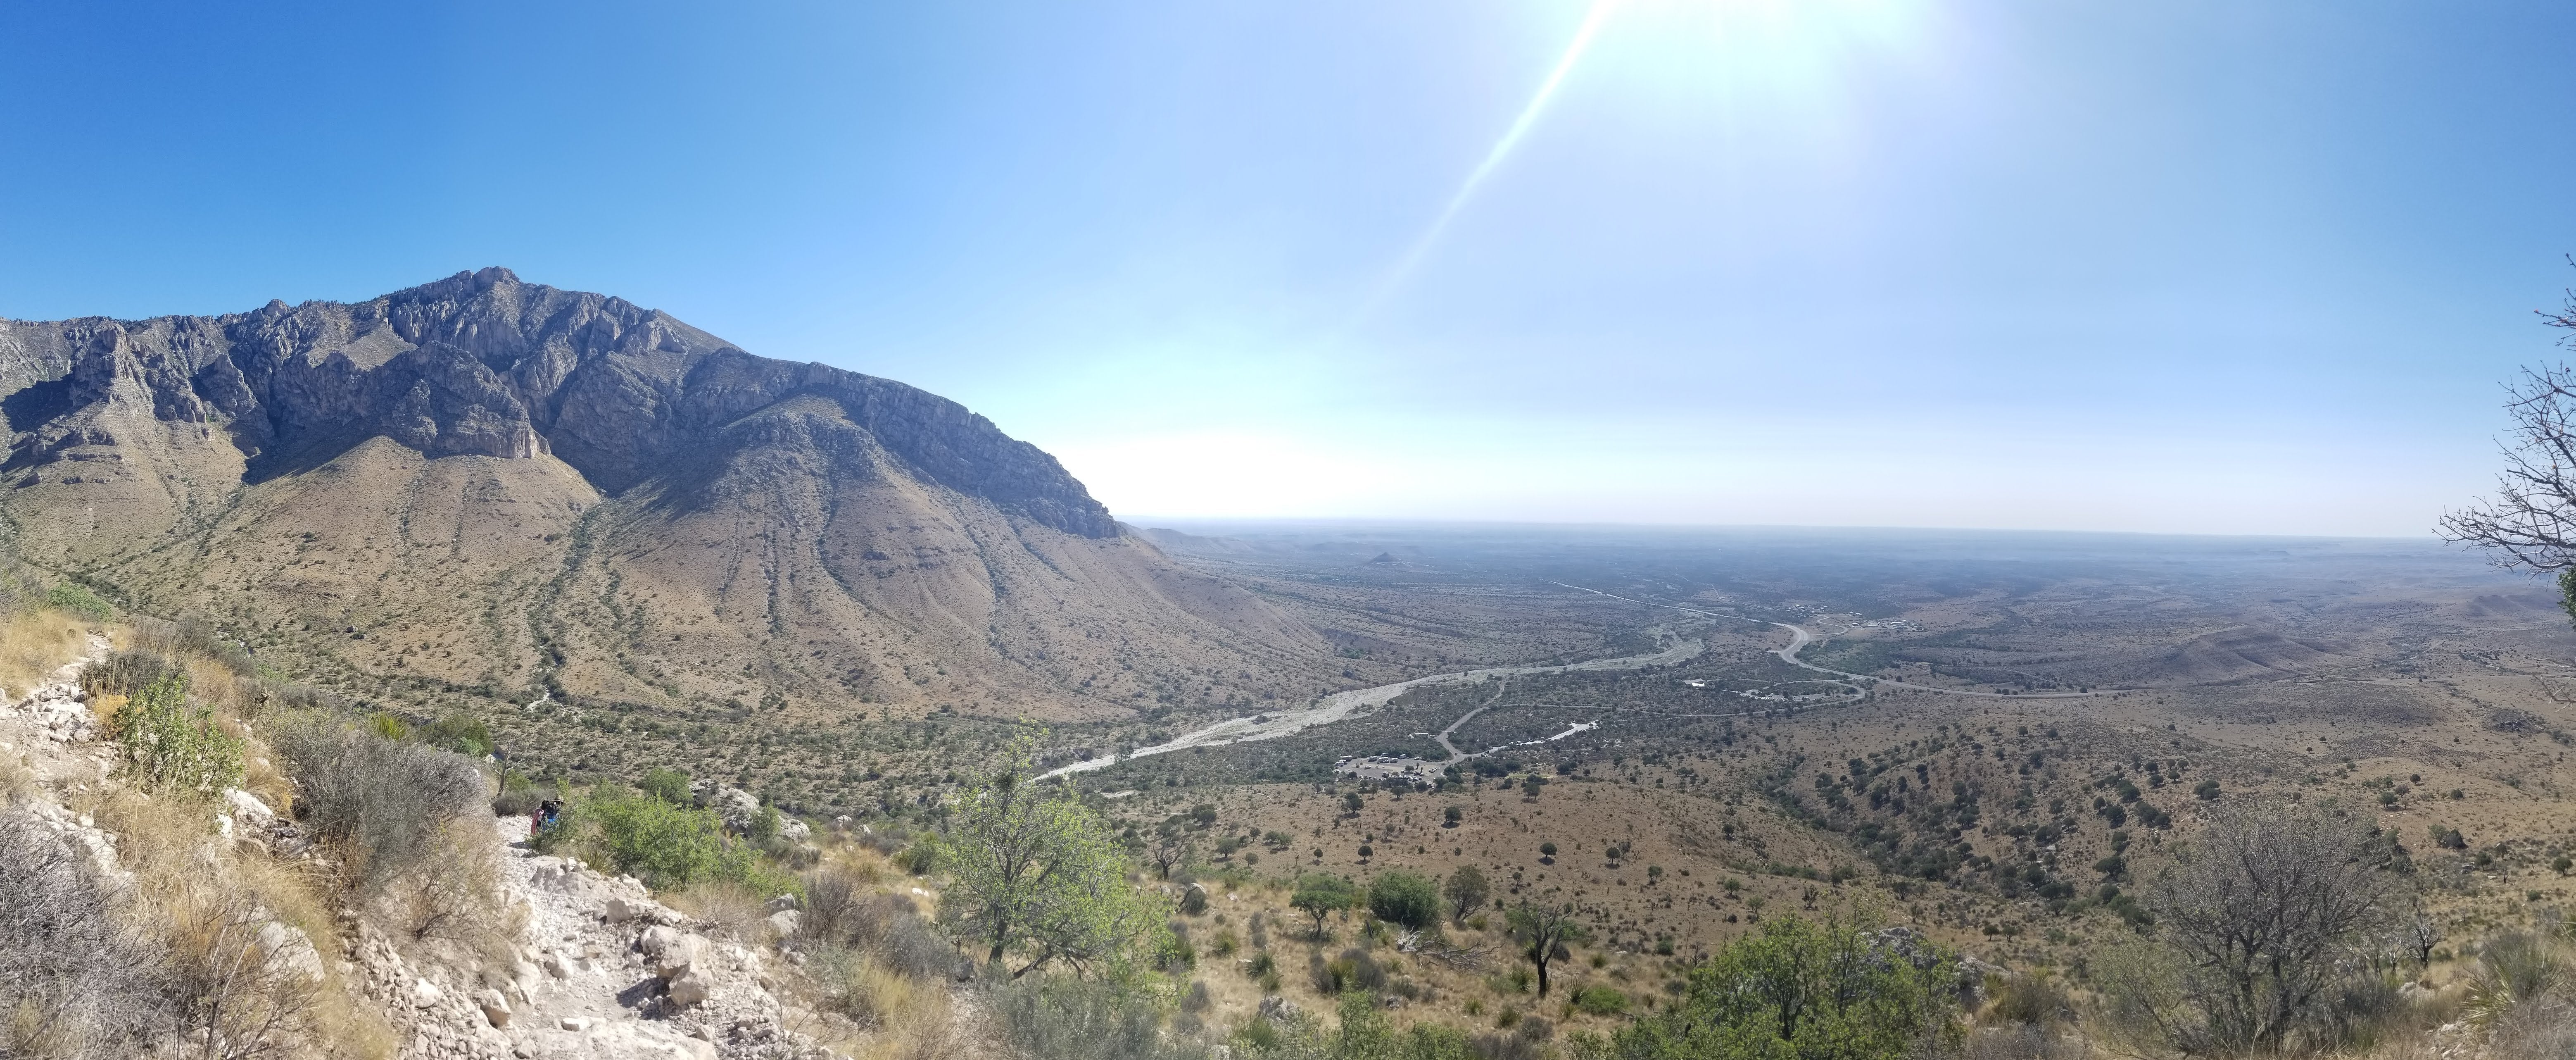 View of campground from 1/4 way up Guadalupe Peak trail